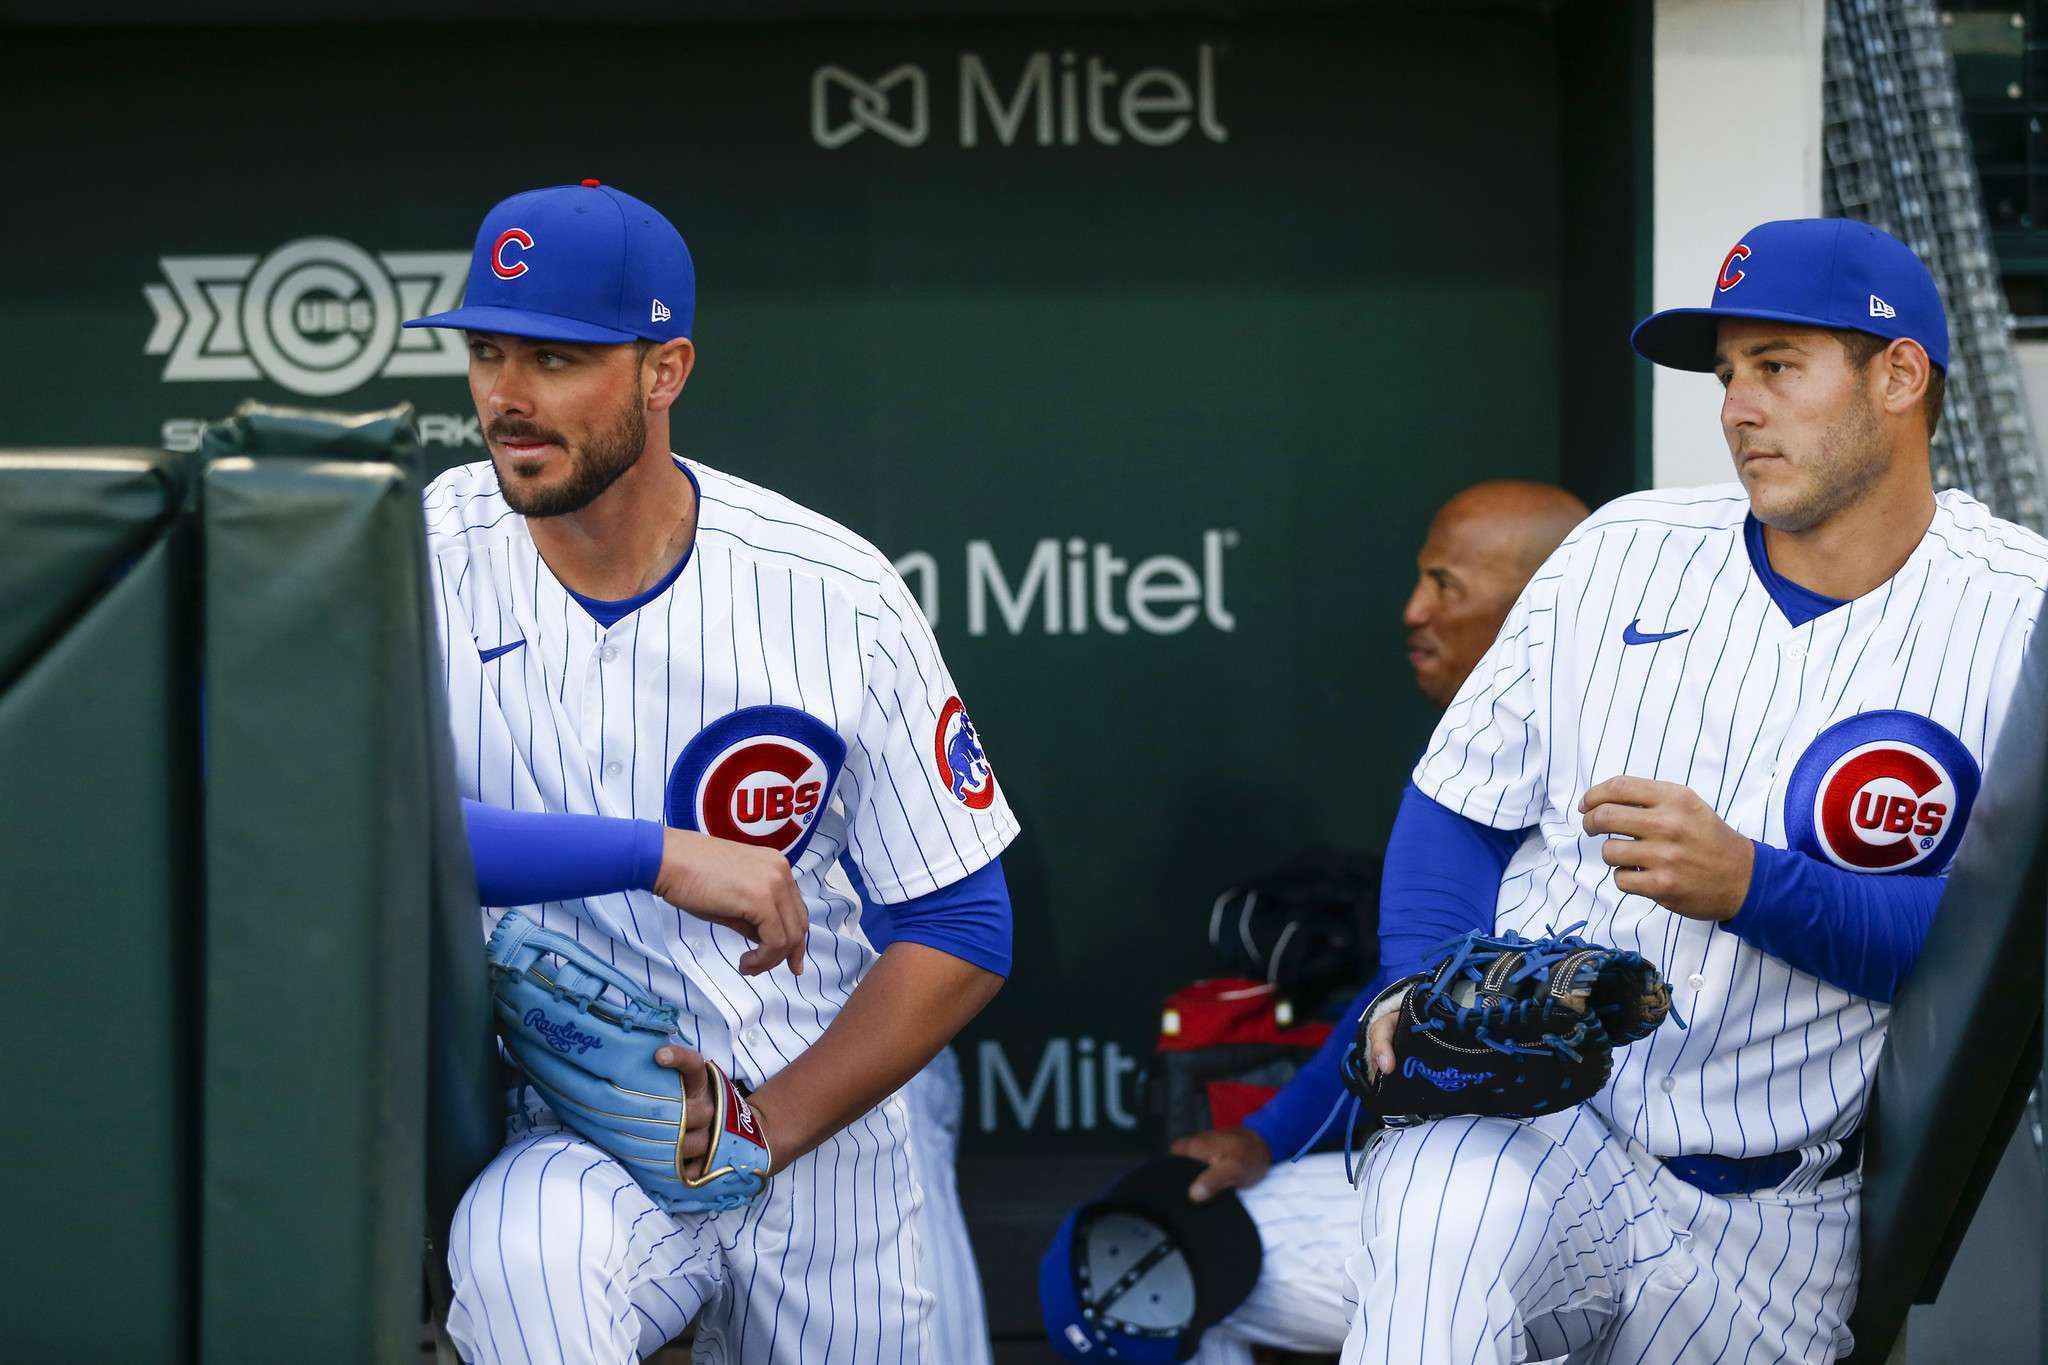 Kris Bryant says fellow Cub Anthony Rizzo is in his wedding – NBC